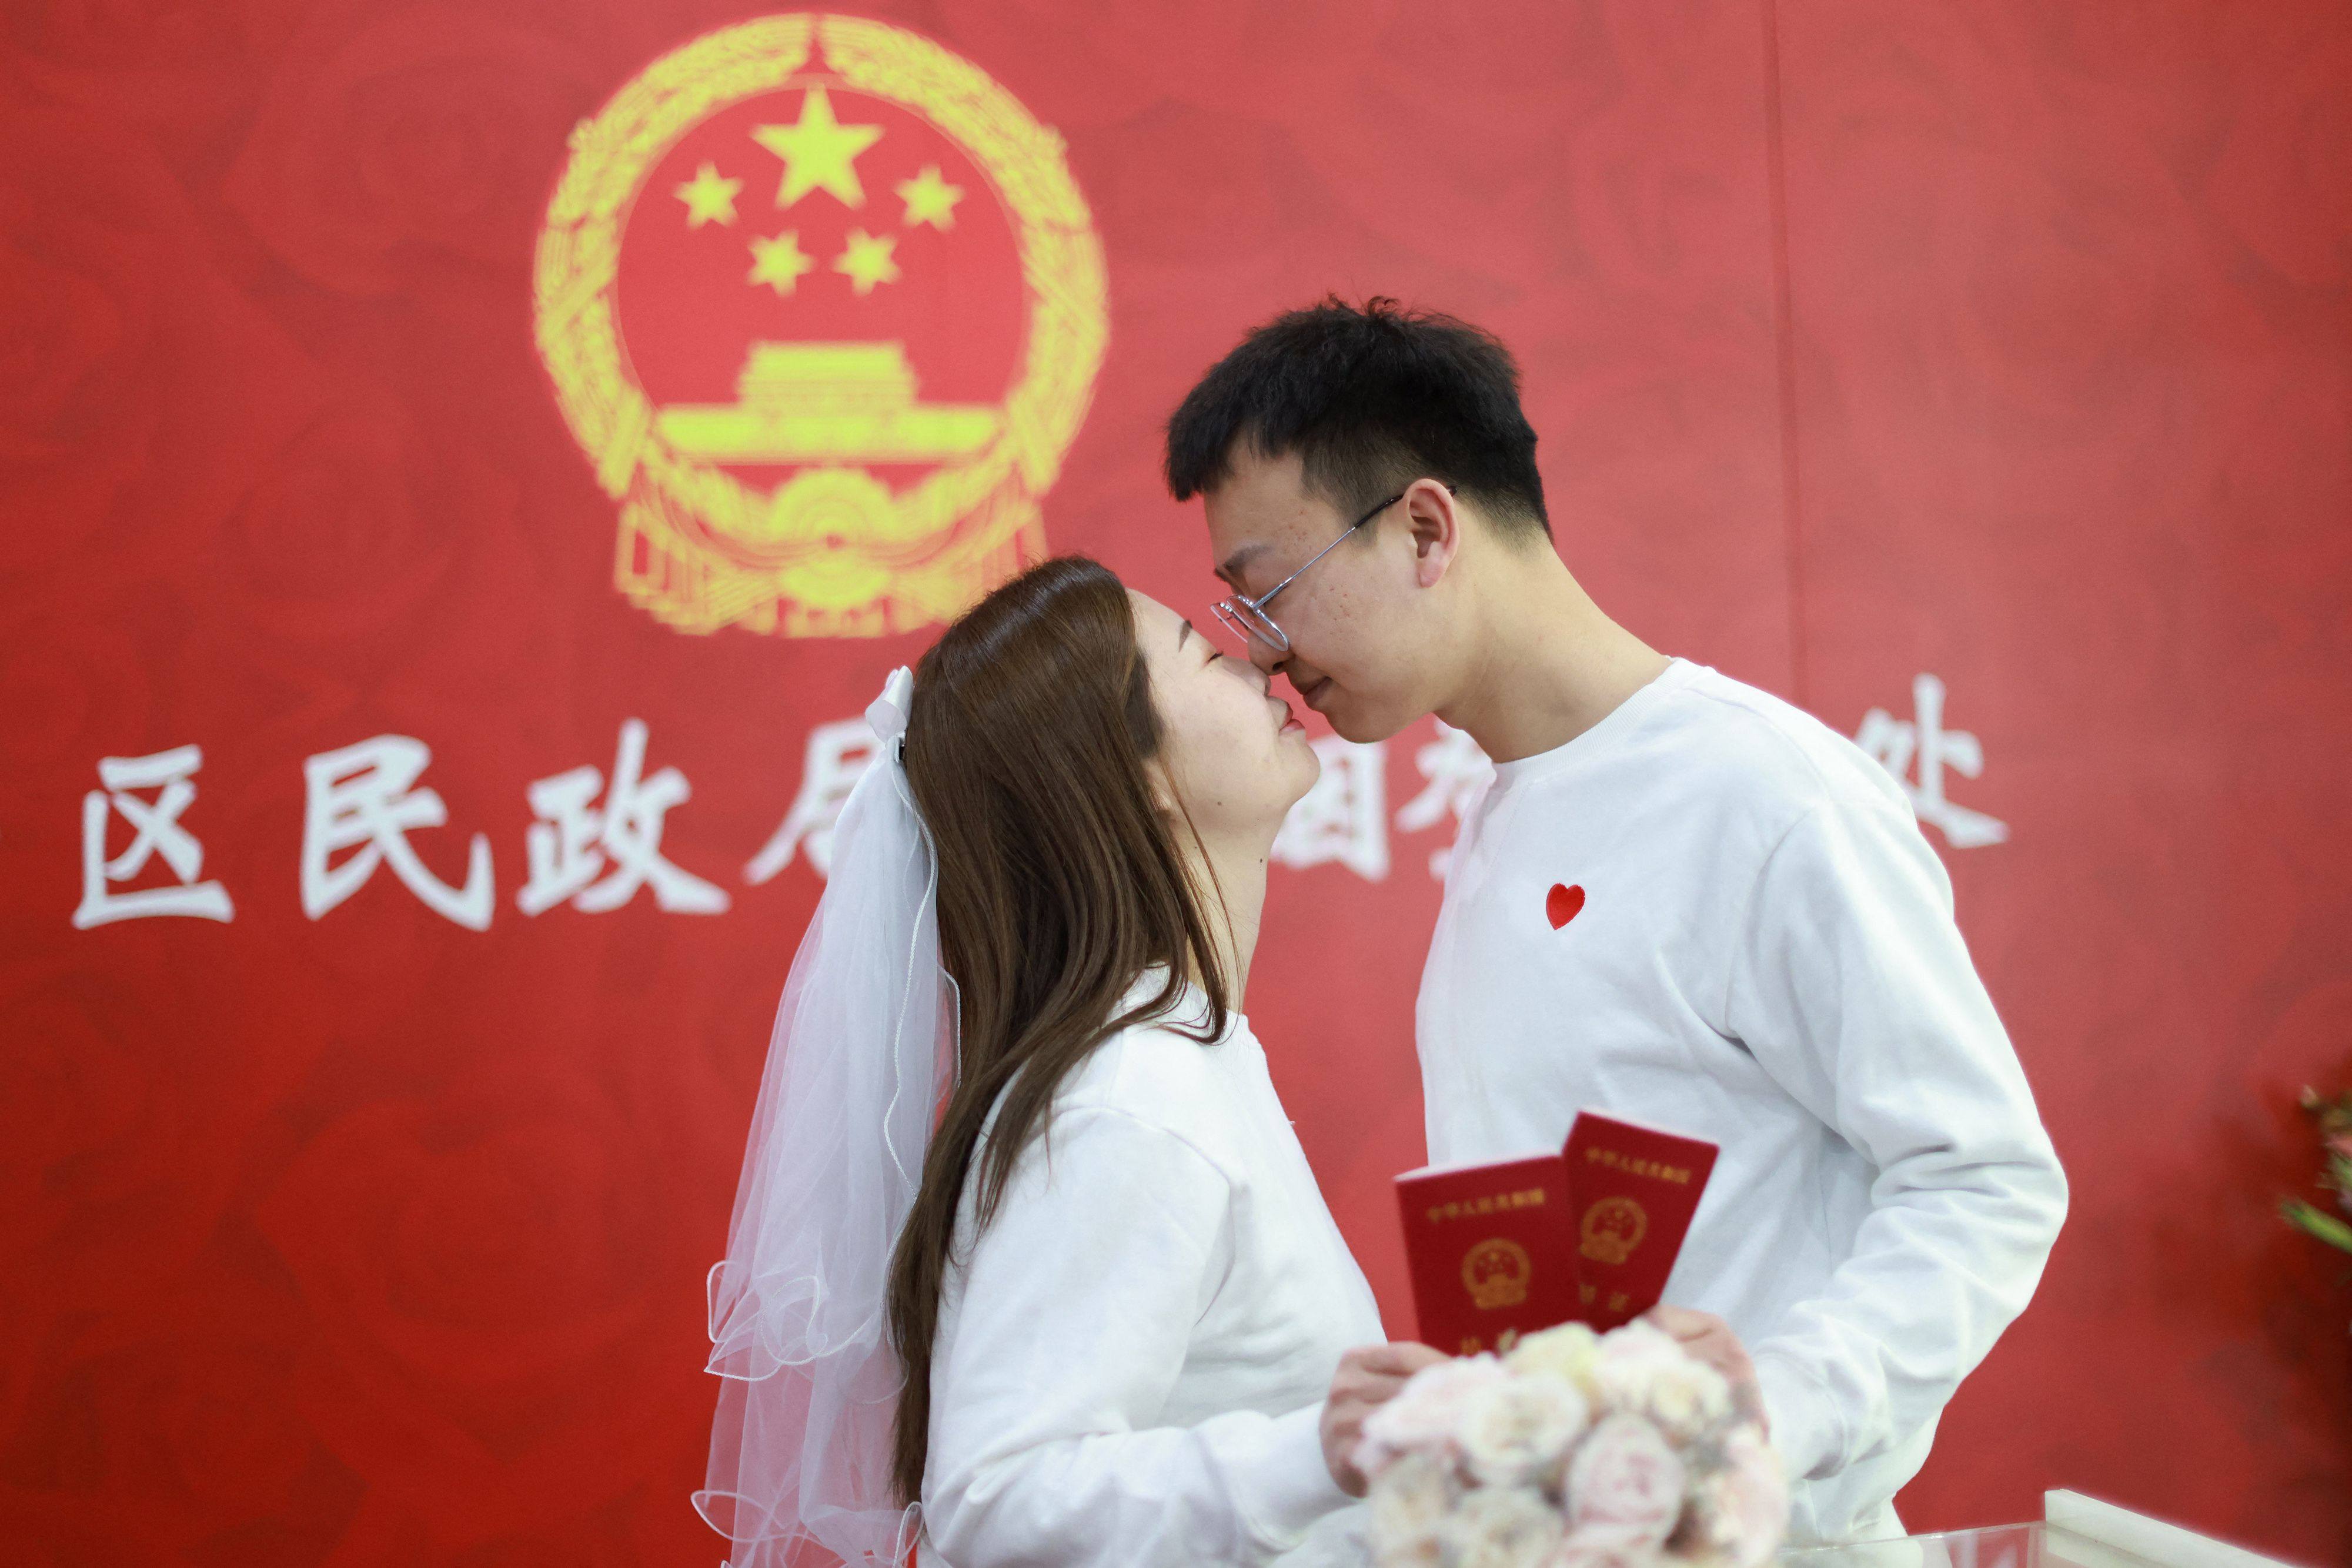 China should “facilitate individuals’ plans for school, childbirth and employment” with a higher education system that supports starting a family, delegate says. Photo: AFP